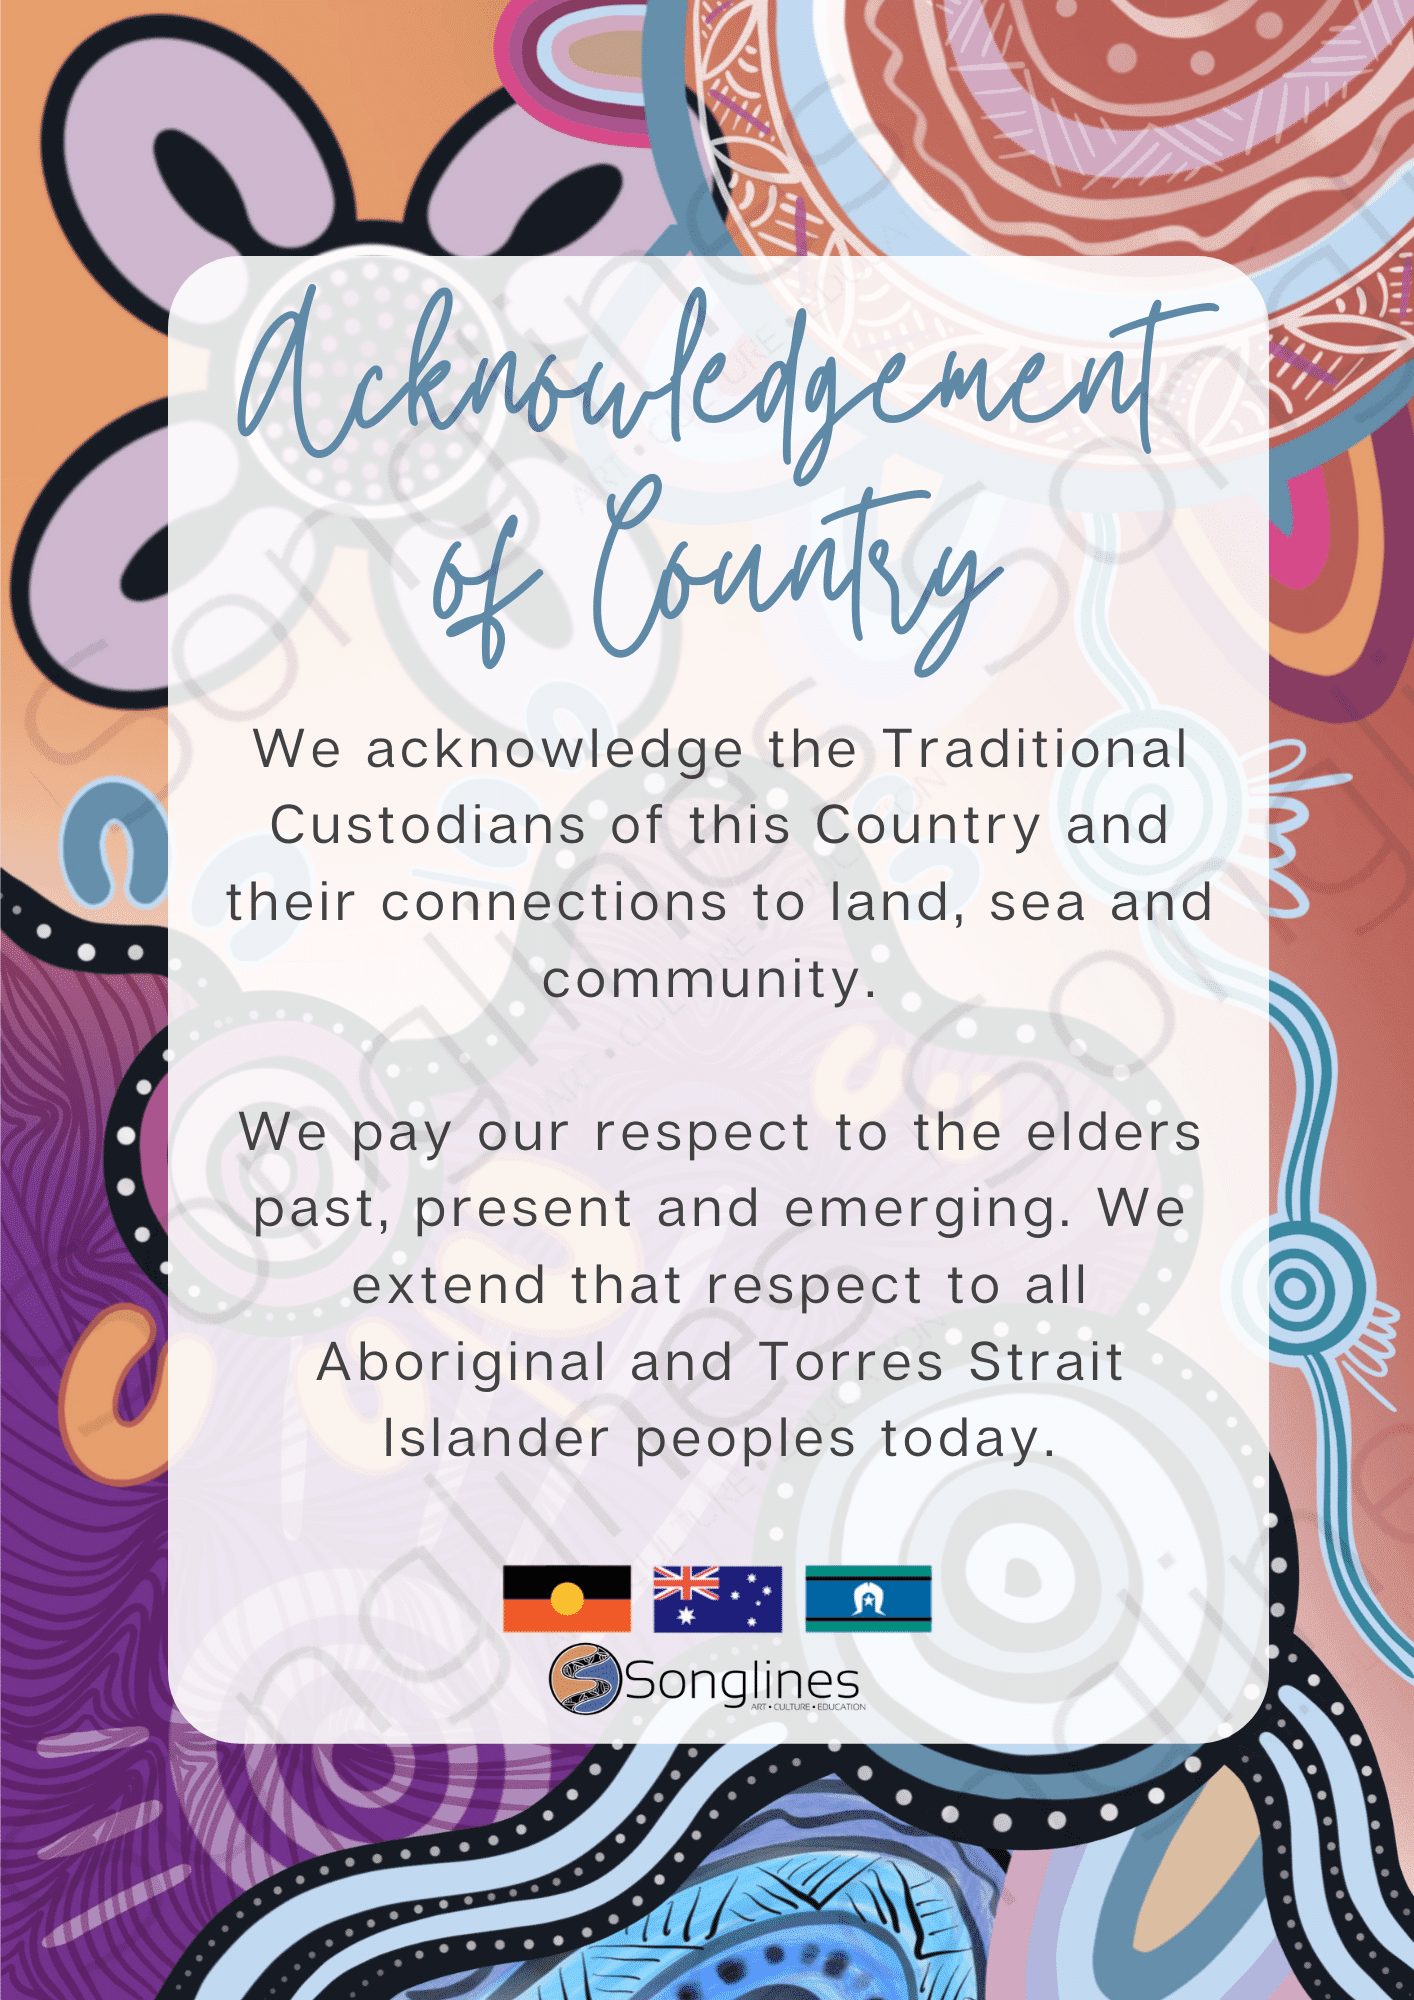 Acknowledgement of Country – Awaken Resources acknowledgement of country